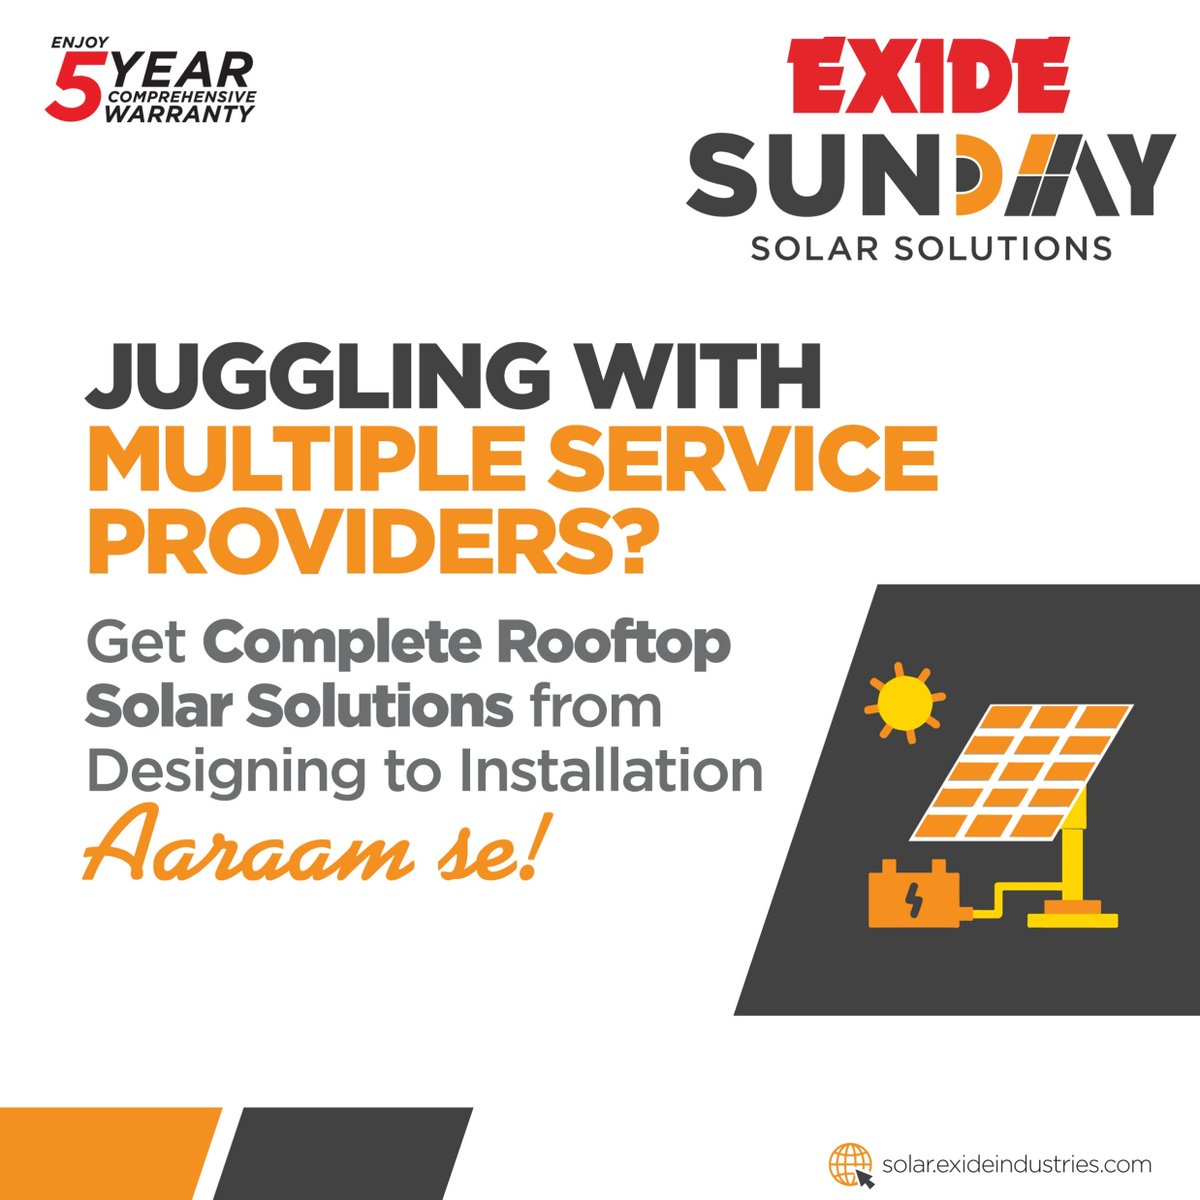 Thinking about going solar? Choose Exide Sunday from planning to design & implementation. Find everything under one roof for your rooftop solar system. Go solar, Aaraam Se!
Know more solar.exideindustries.com
#Exide #SustainableEnergy #SundayLiving #Exidesolar